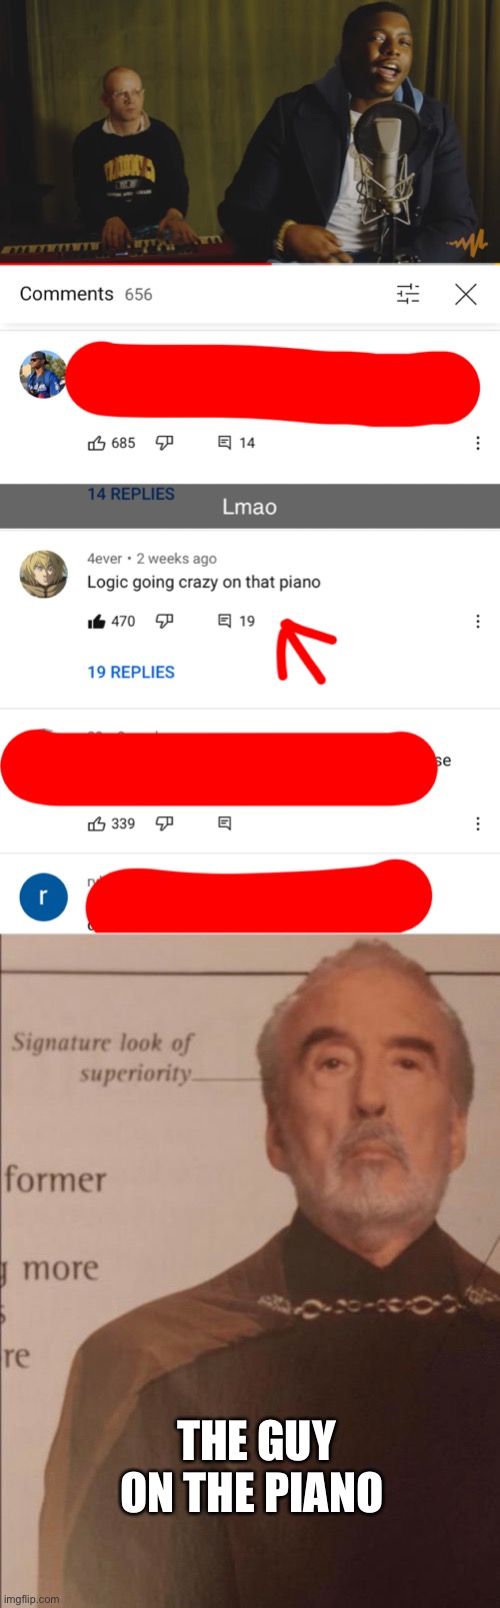 THE GUY ON THE PIANO | image tagged in facepalm | made w/ Imgflip meme maker